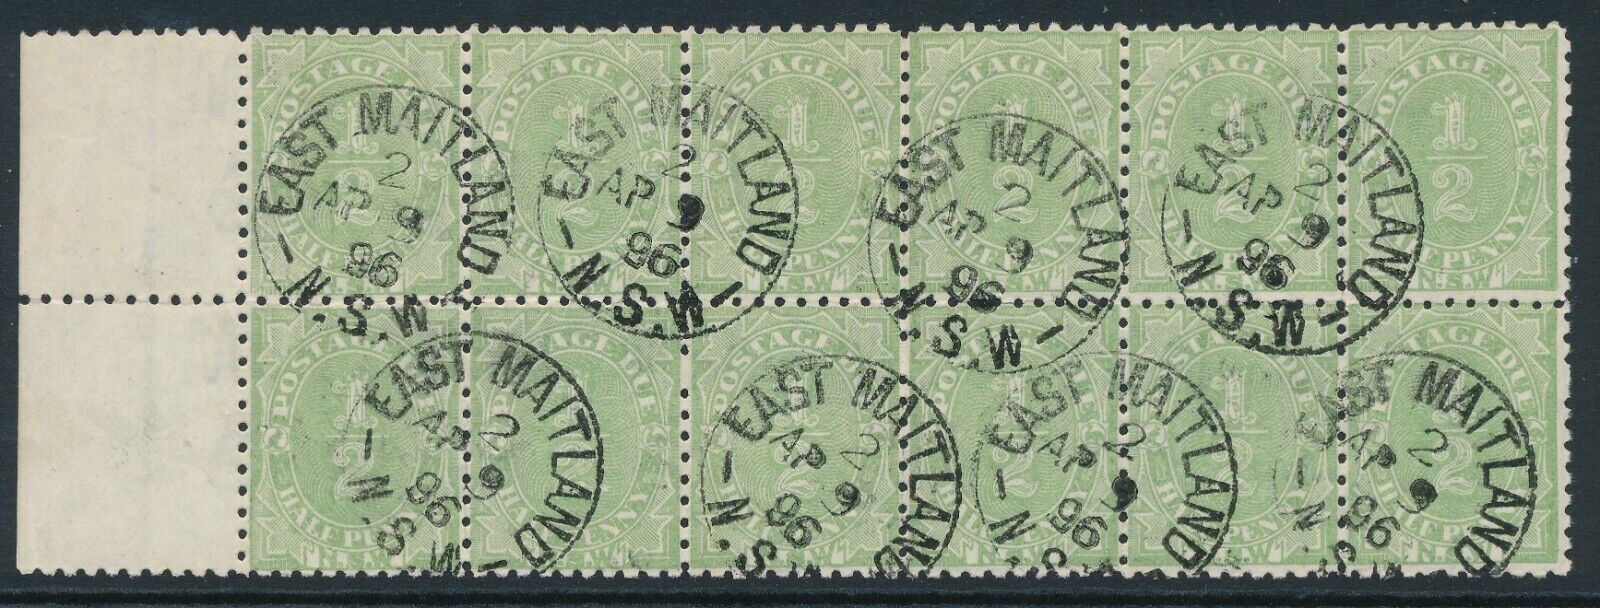 SG D1 New south wales 1892 ½d Green perf 10. A very fine used block of 12.